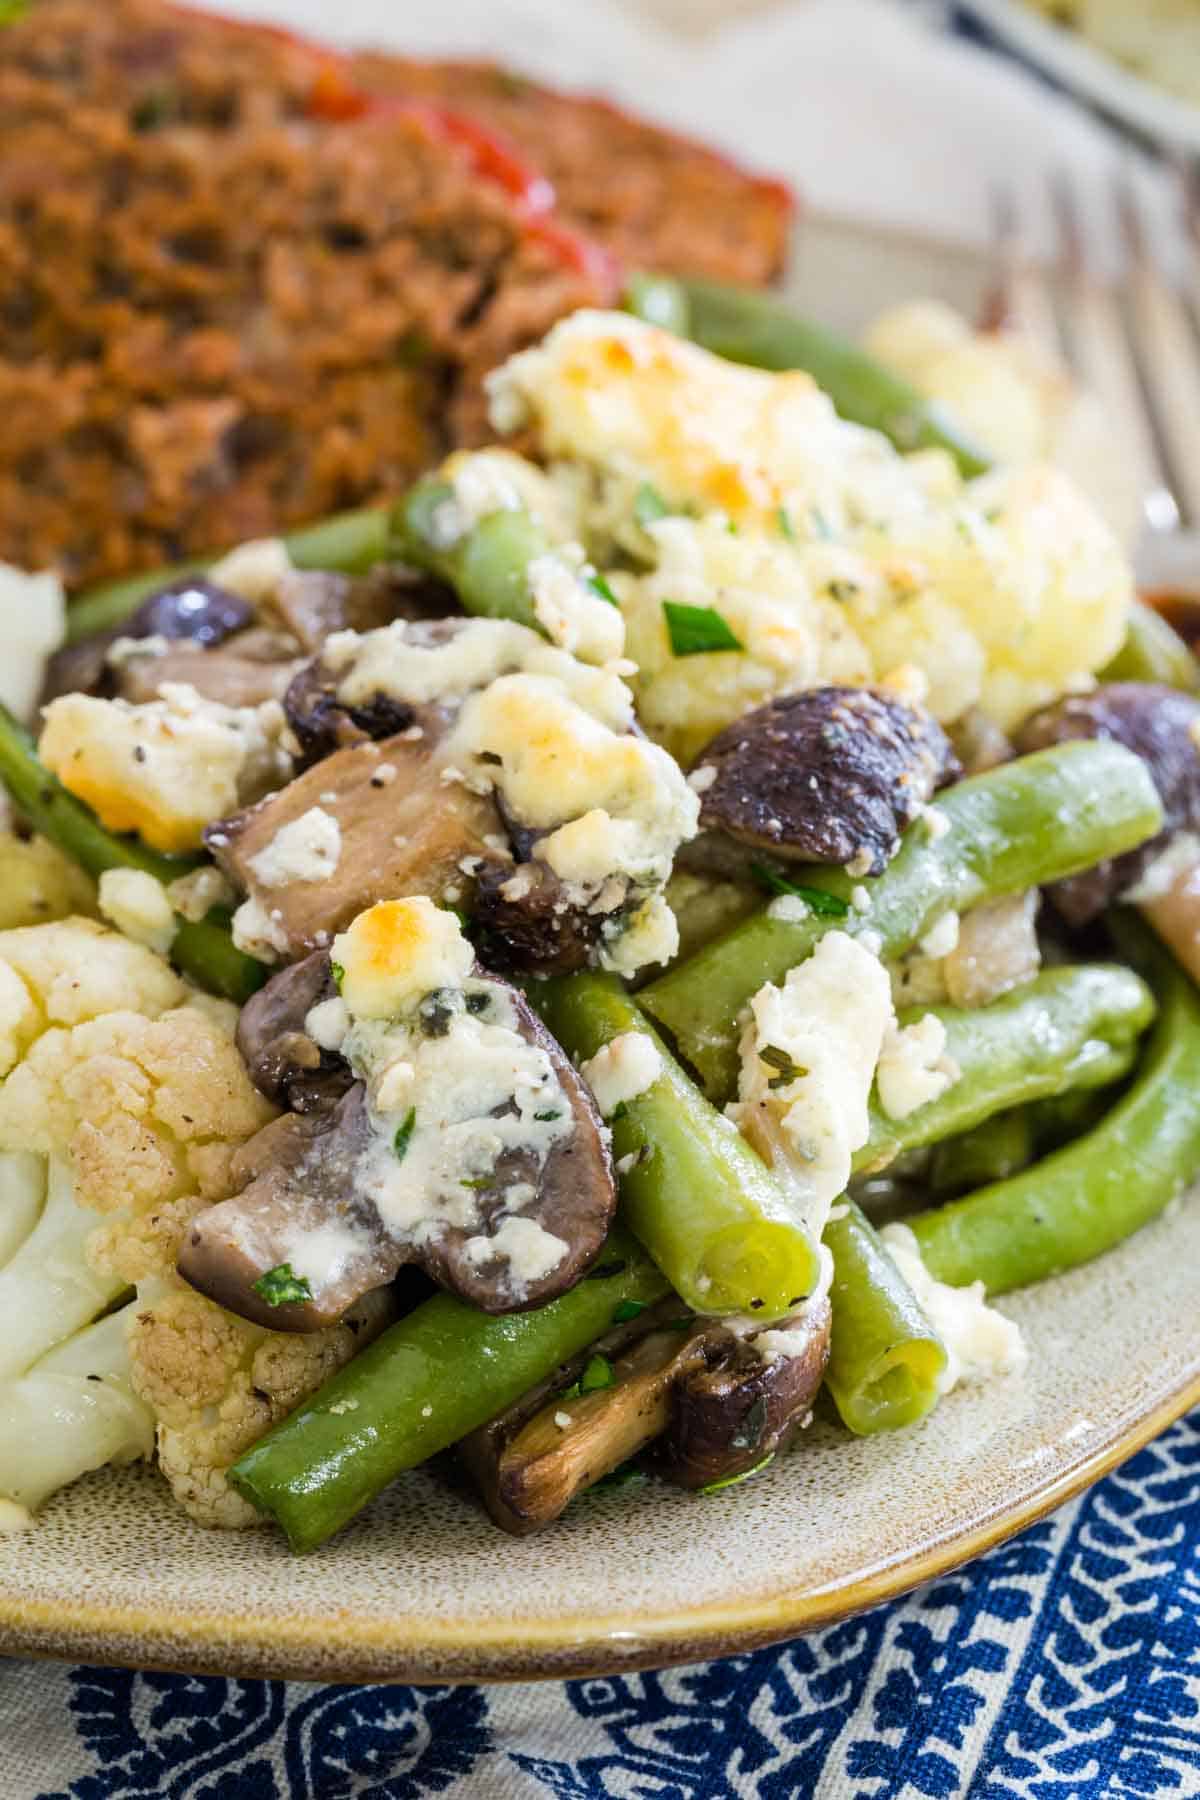 A plate of dinner includes a big portion of blue cheese roasted vegetables.